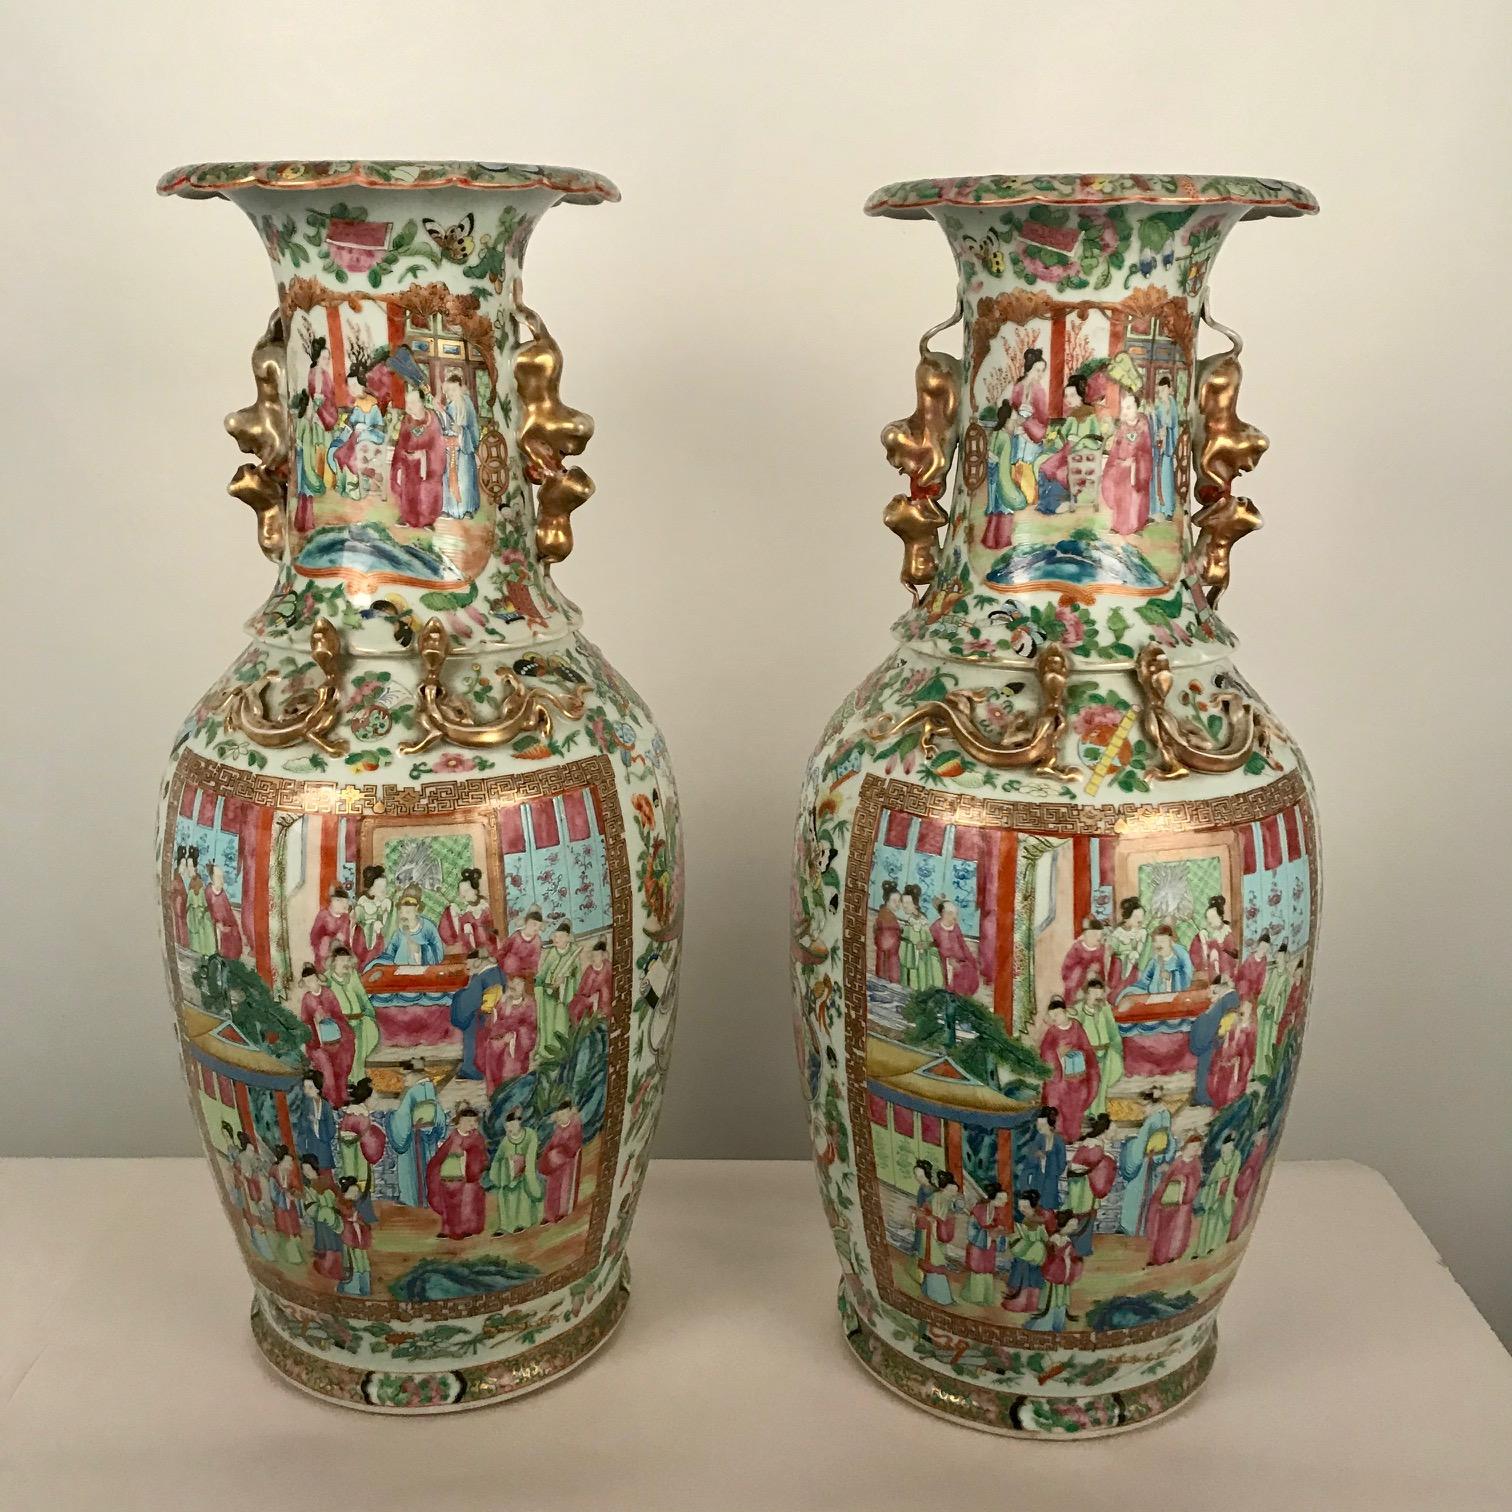 Chinese Export Large Pair of Antique Canton Rose Medallion Baluster Vases